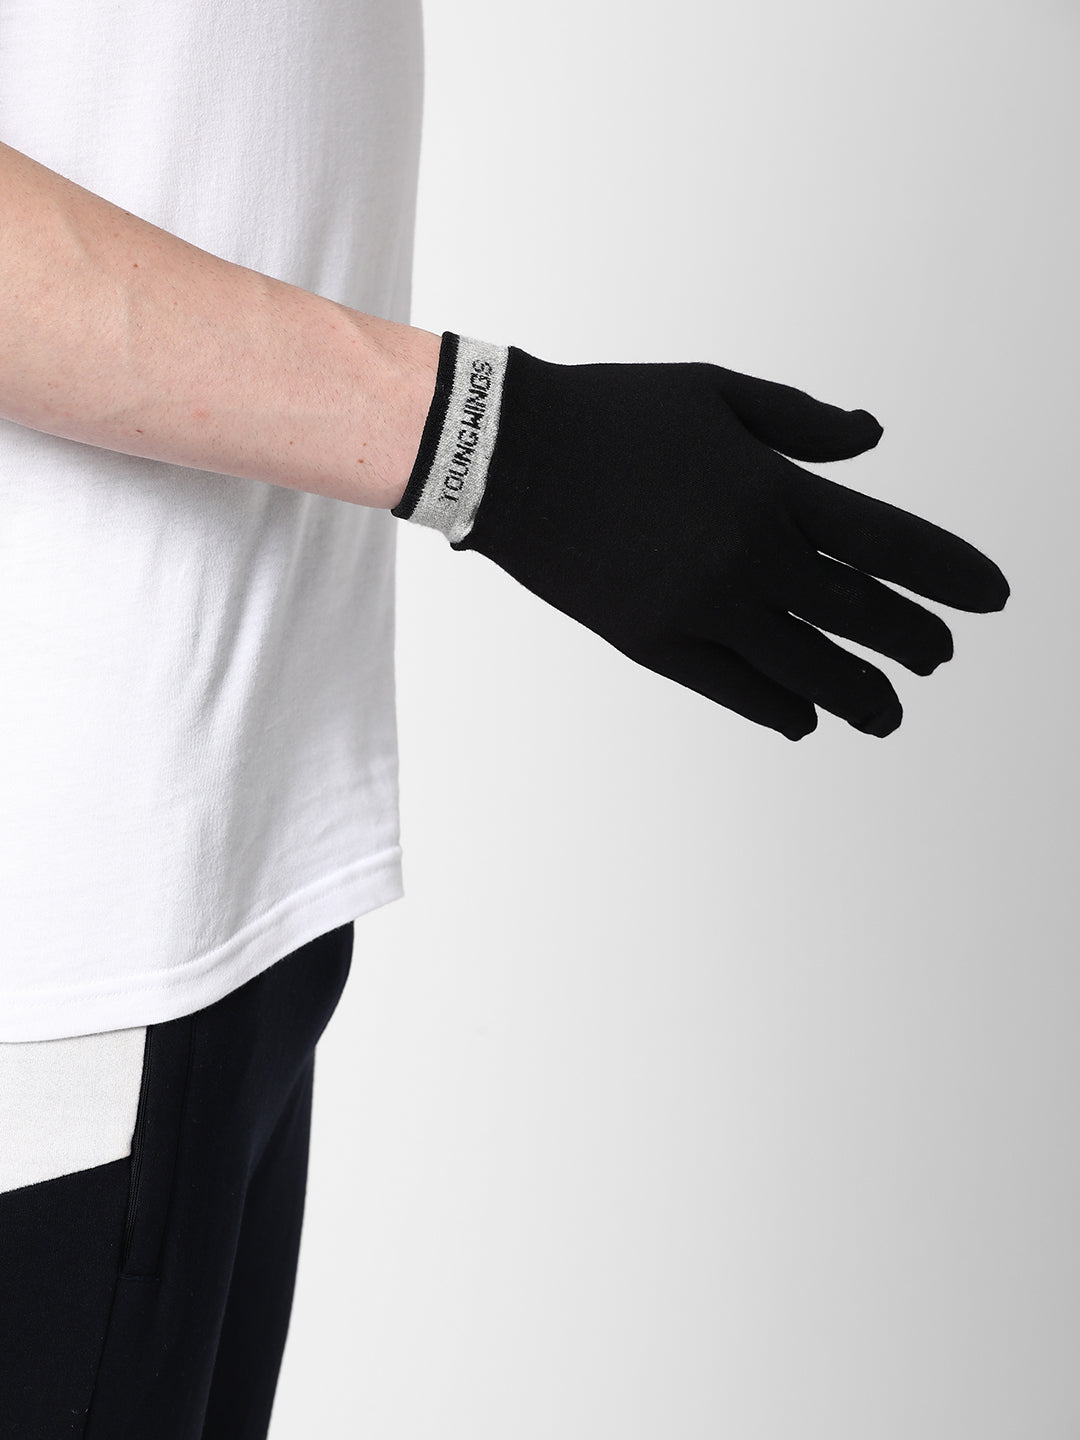 Men's Antibacterial Dri-Fit Polyester Hand Gloves - Pack of 2 Pairs